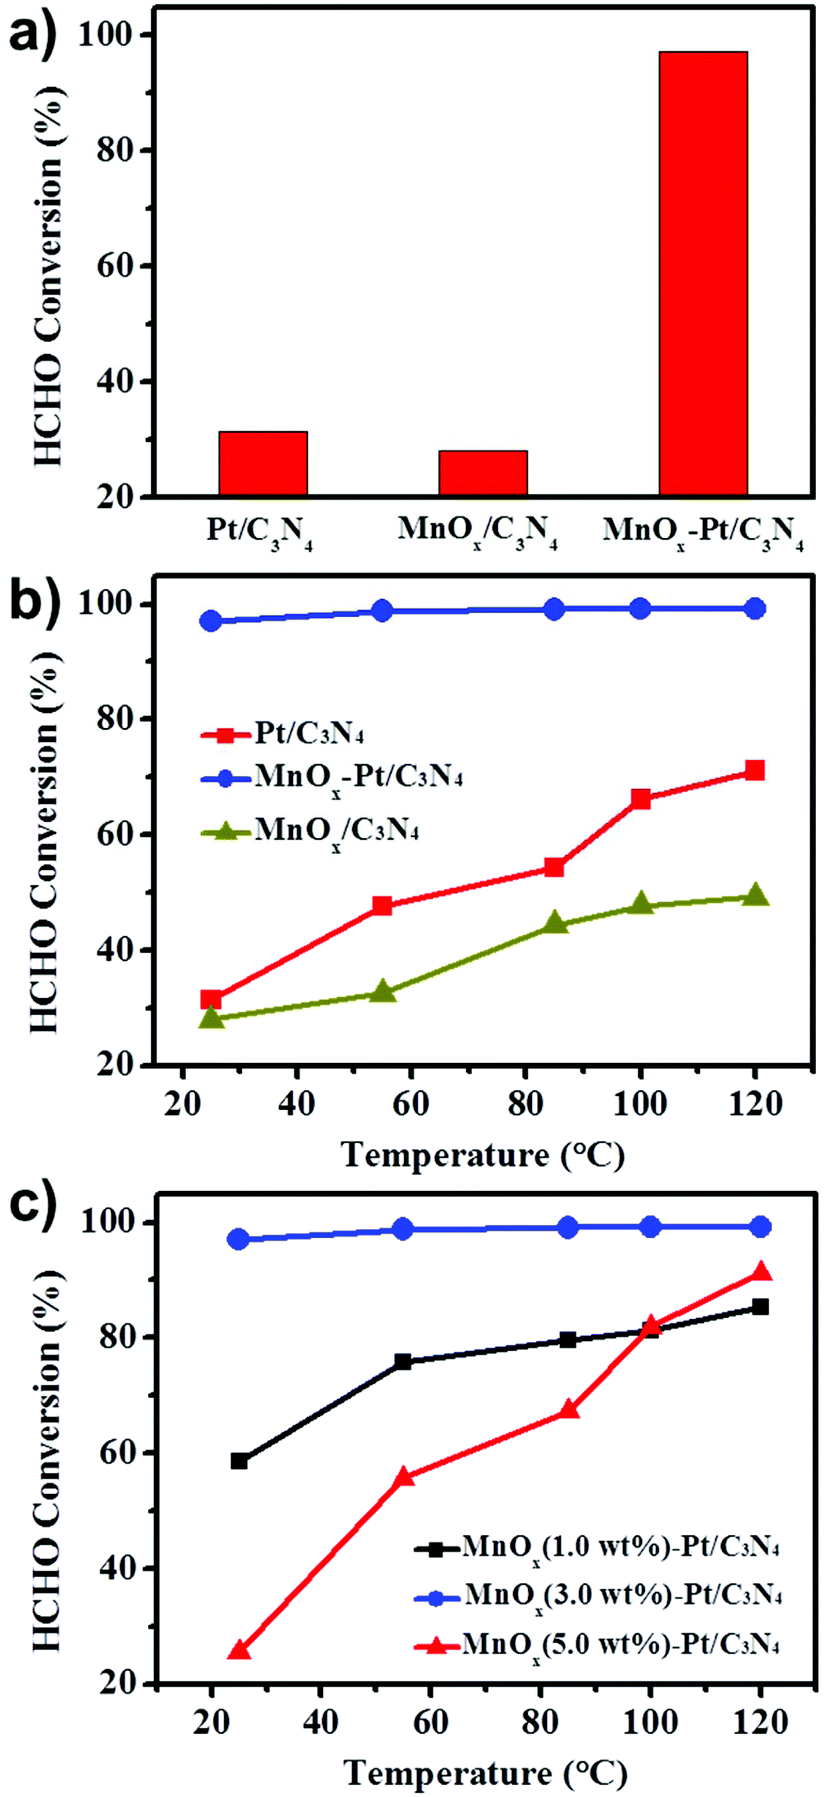 Photo Mediated Co Loading Of Highly Dispersed Mno X Pt On G C 3 N 4 Boosts The Ambient Catalytic Oxidation Of Formaldehyde Nanoscale Rsc Publishing Doi 10 1039 C8nr08731h